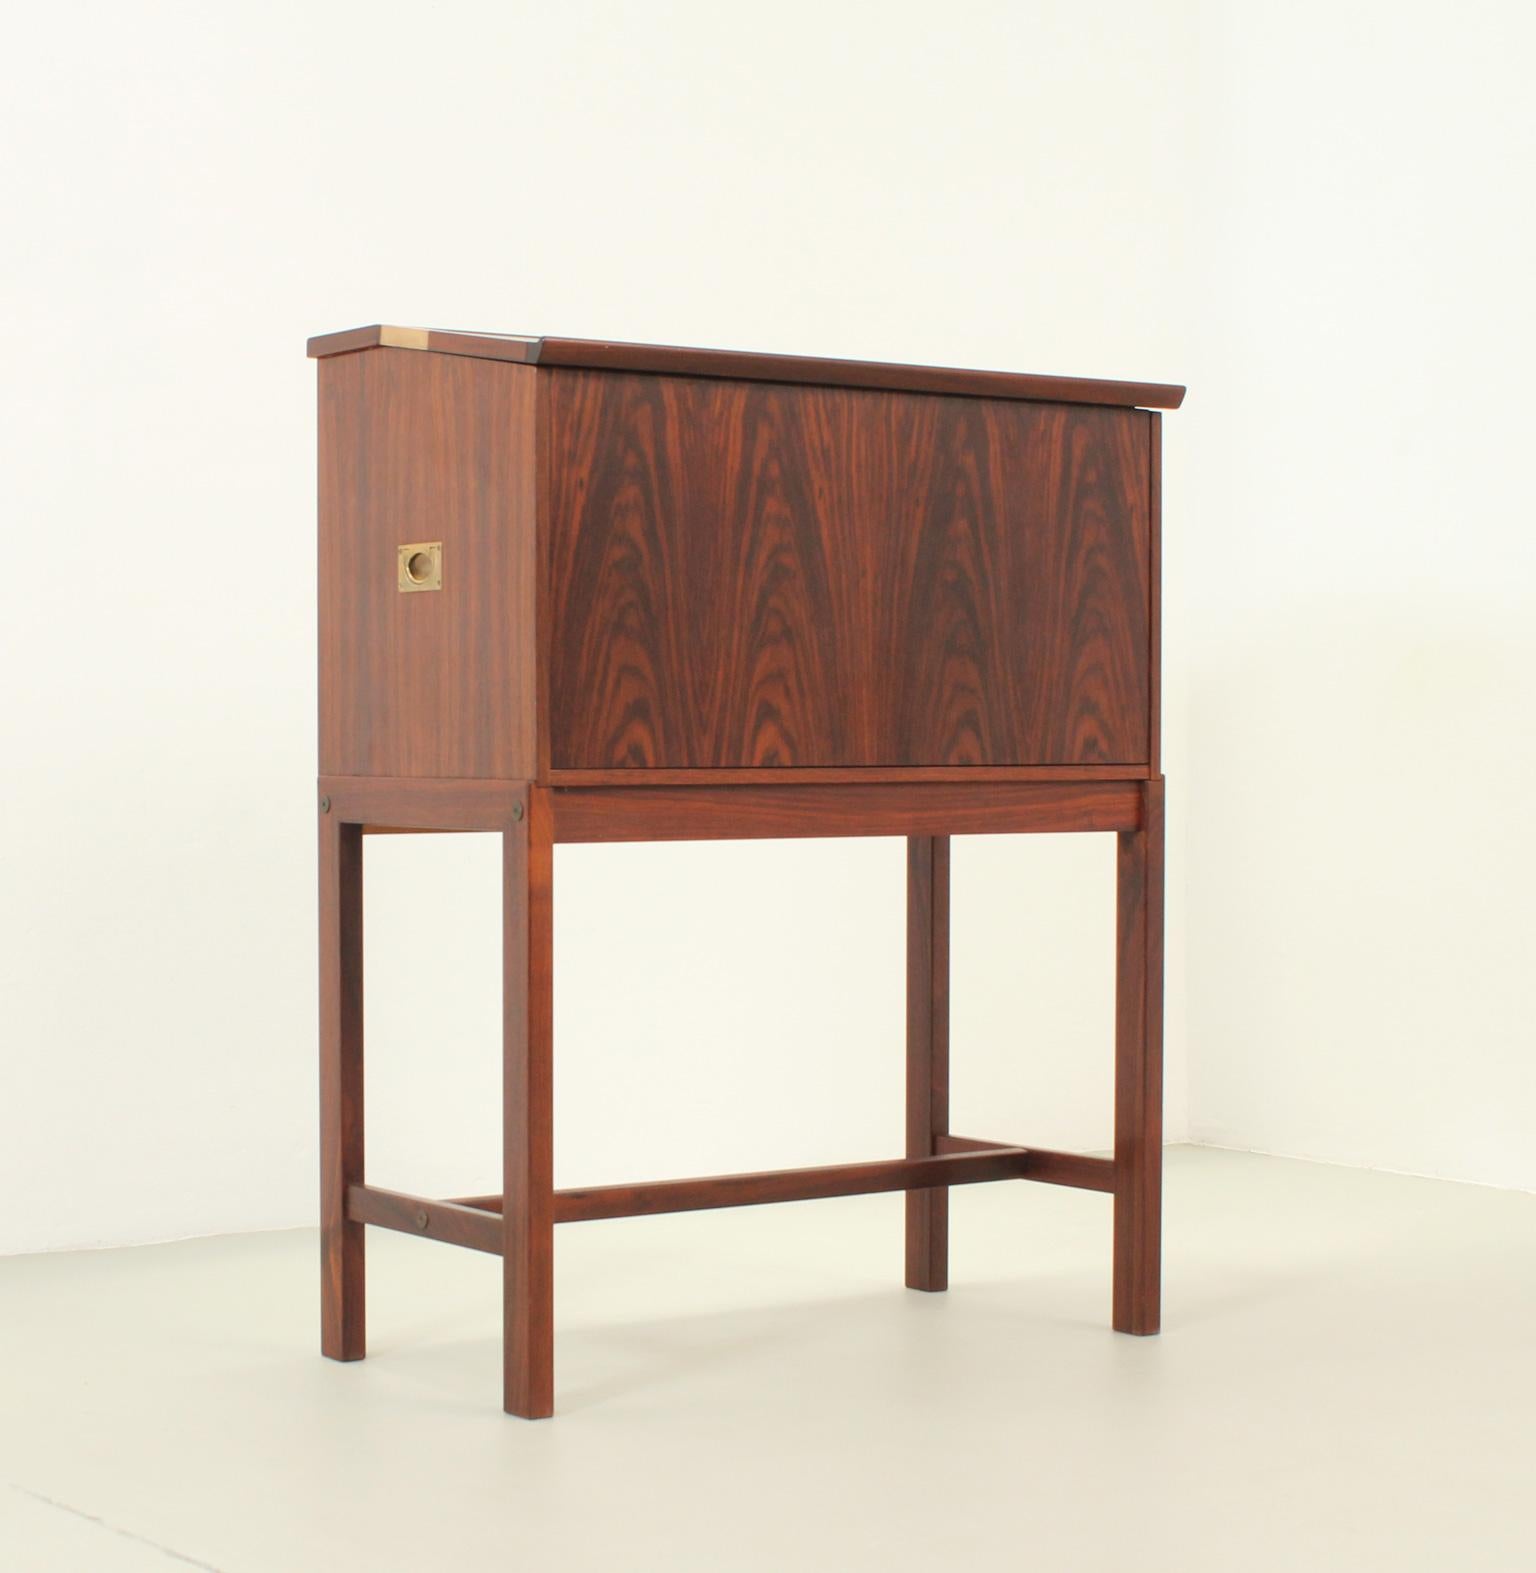 Standing bar cabinet produced by Dyrlund, Denmark, 1960's. Stylish design with the front part that folds down to create a serving surface, and interior with a hole for bottles. Hardwood, brass and leather. 

Measurements when it is open 79 cm.